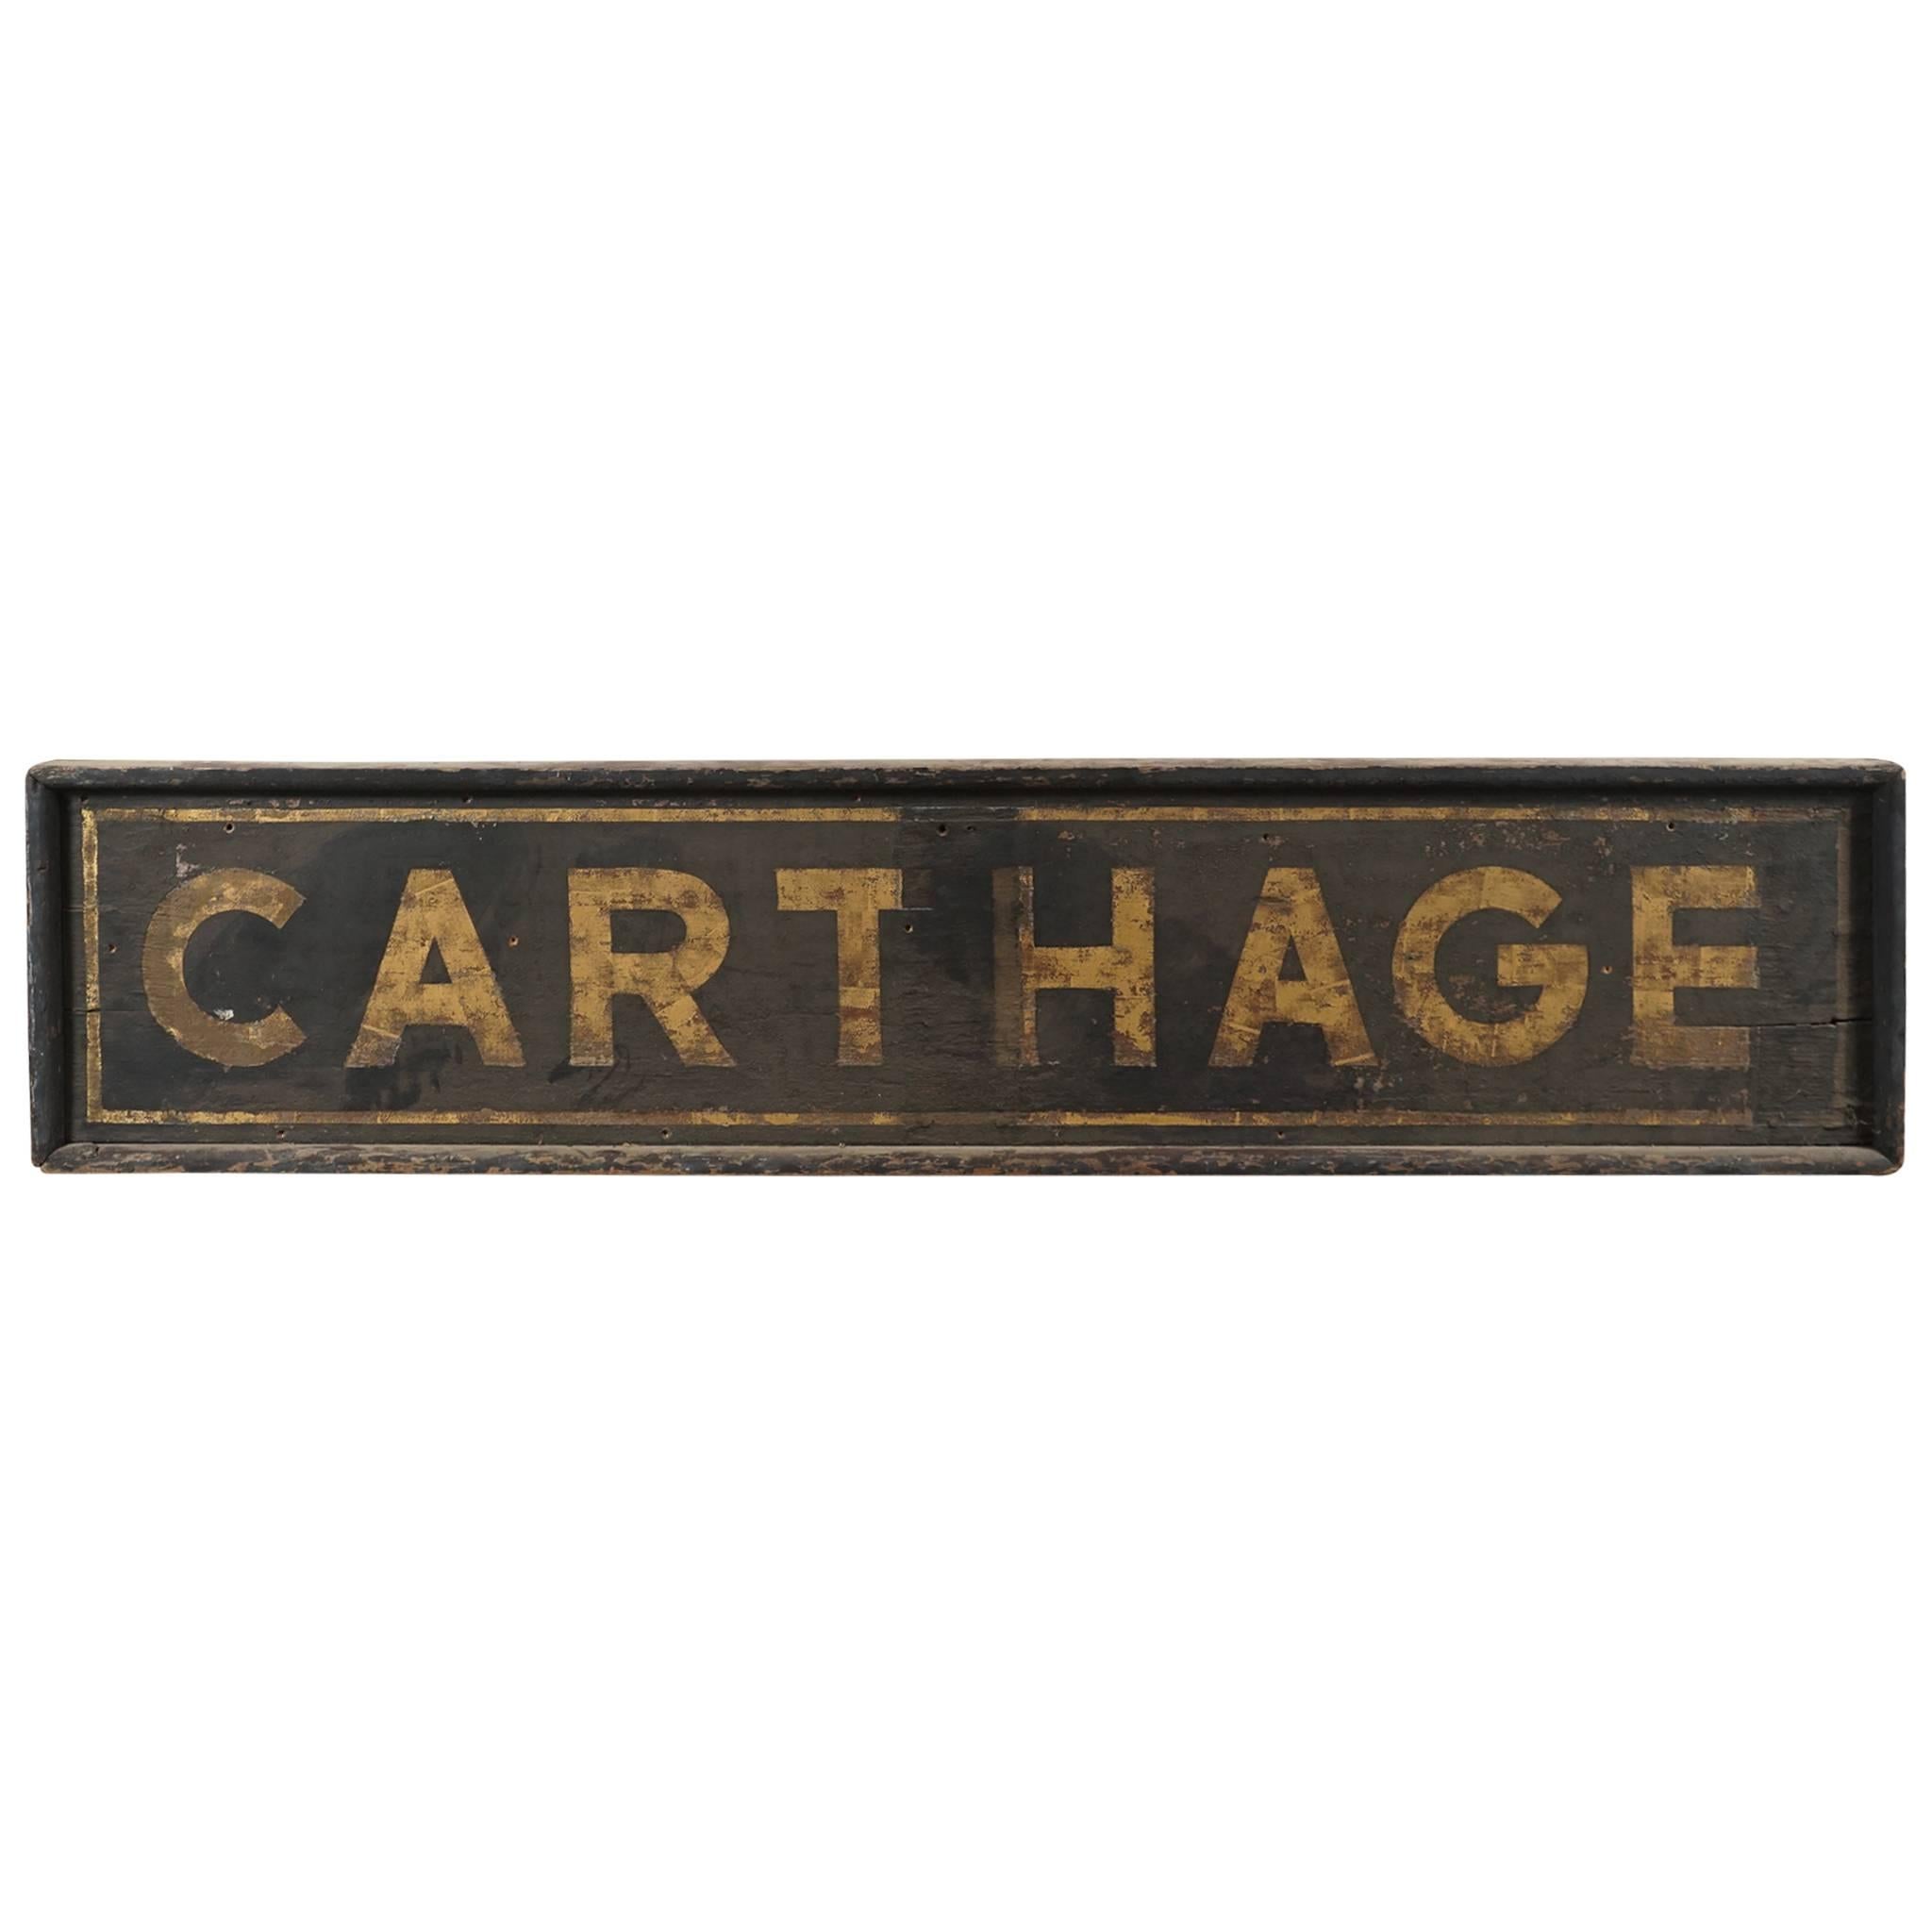 Rxr Depot Sign: Carthage, New York For Sale